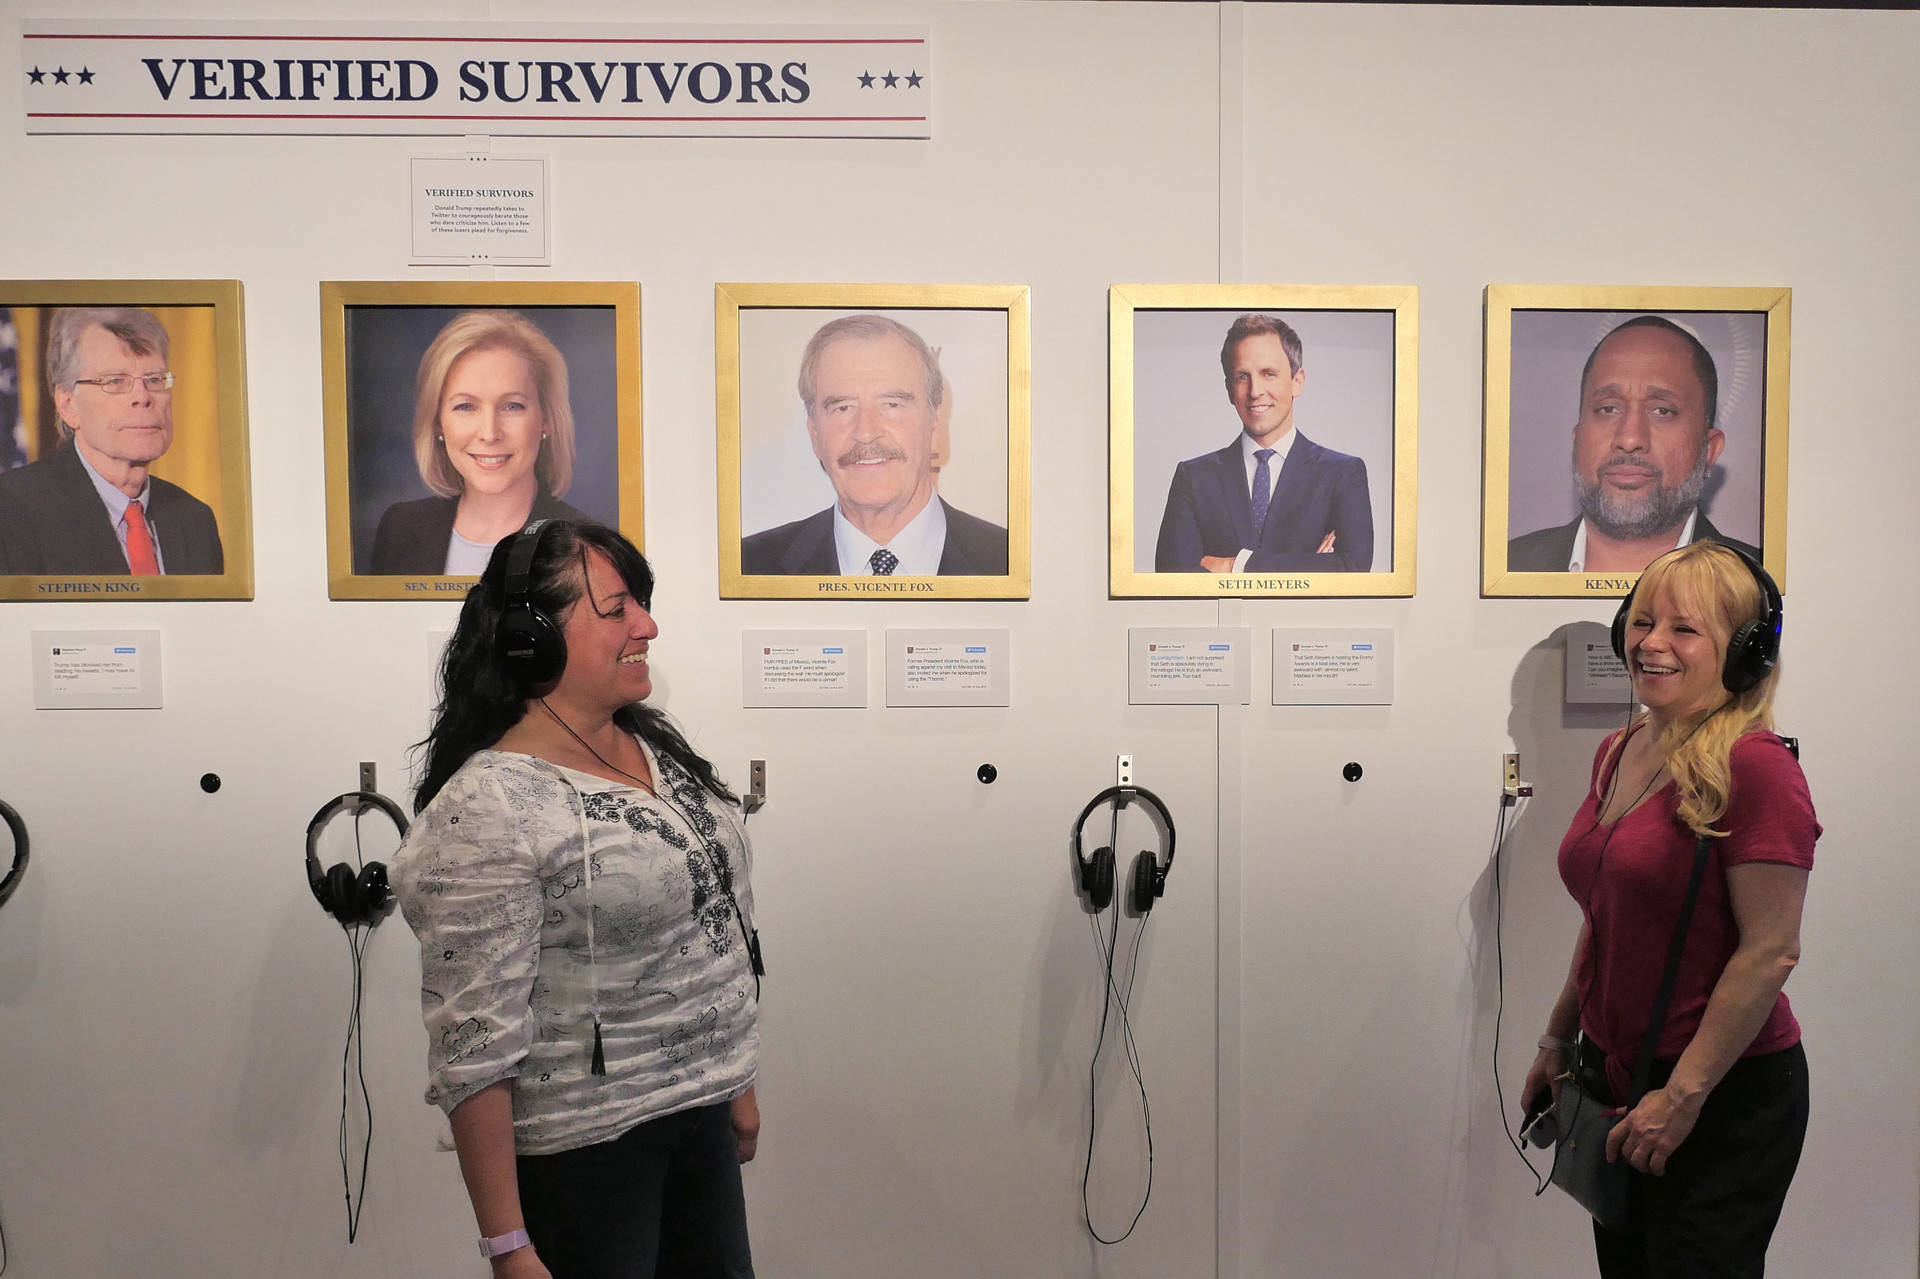 Diana Gaffney, L, and Tina Suca, R, listen to recordings of celebrities and politicians who have battled with President Trump on Twitter and survived at the Donald J. Trump Presidential Twitter Library at Clusterfest in San Francisco. Sheraz Sadiq/KQED